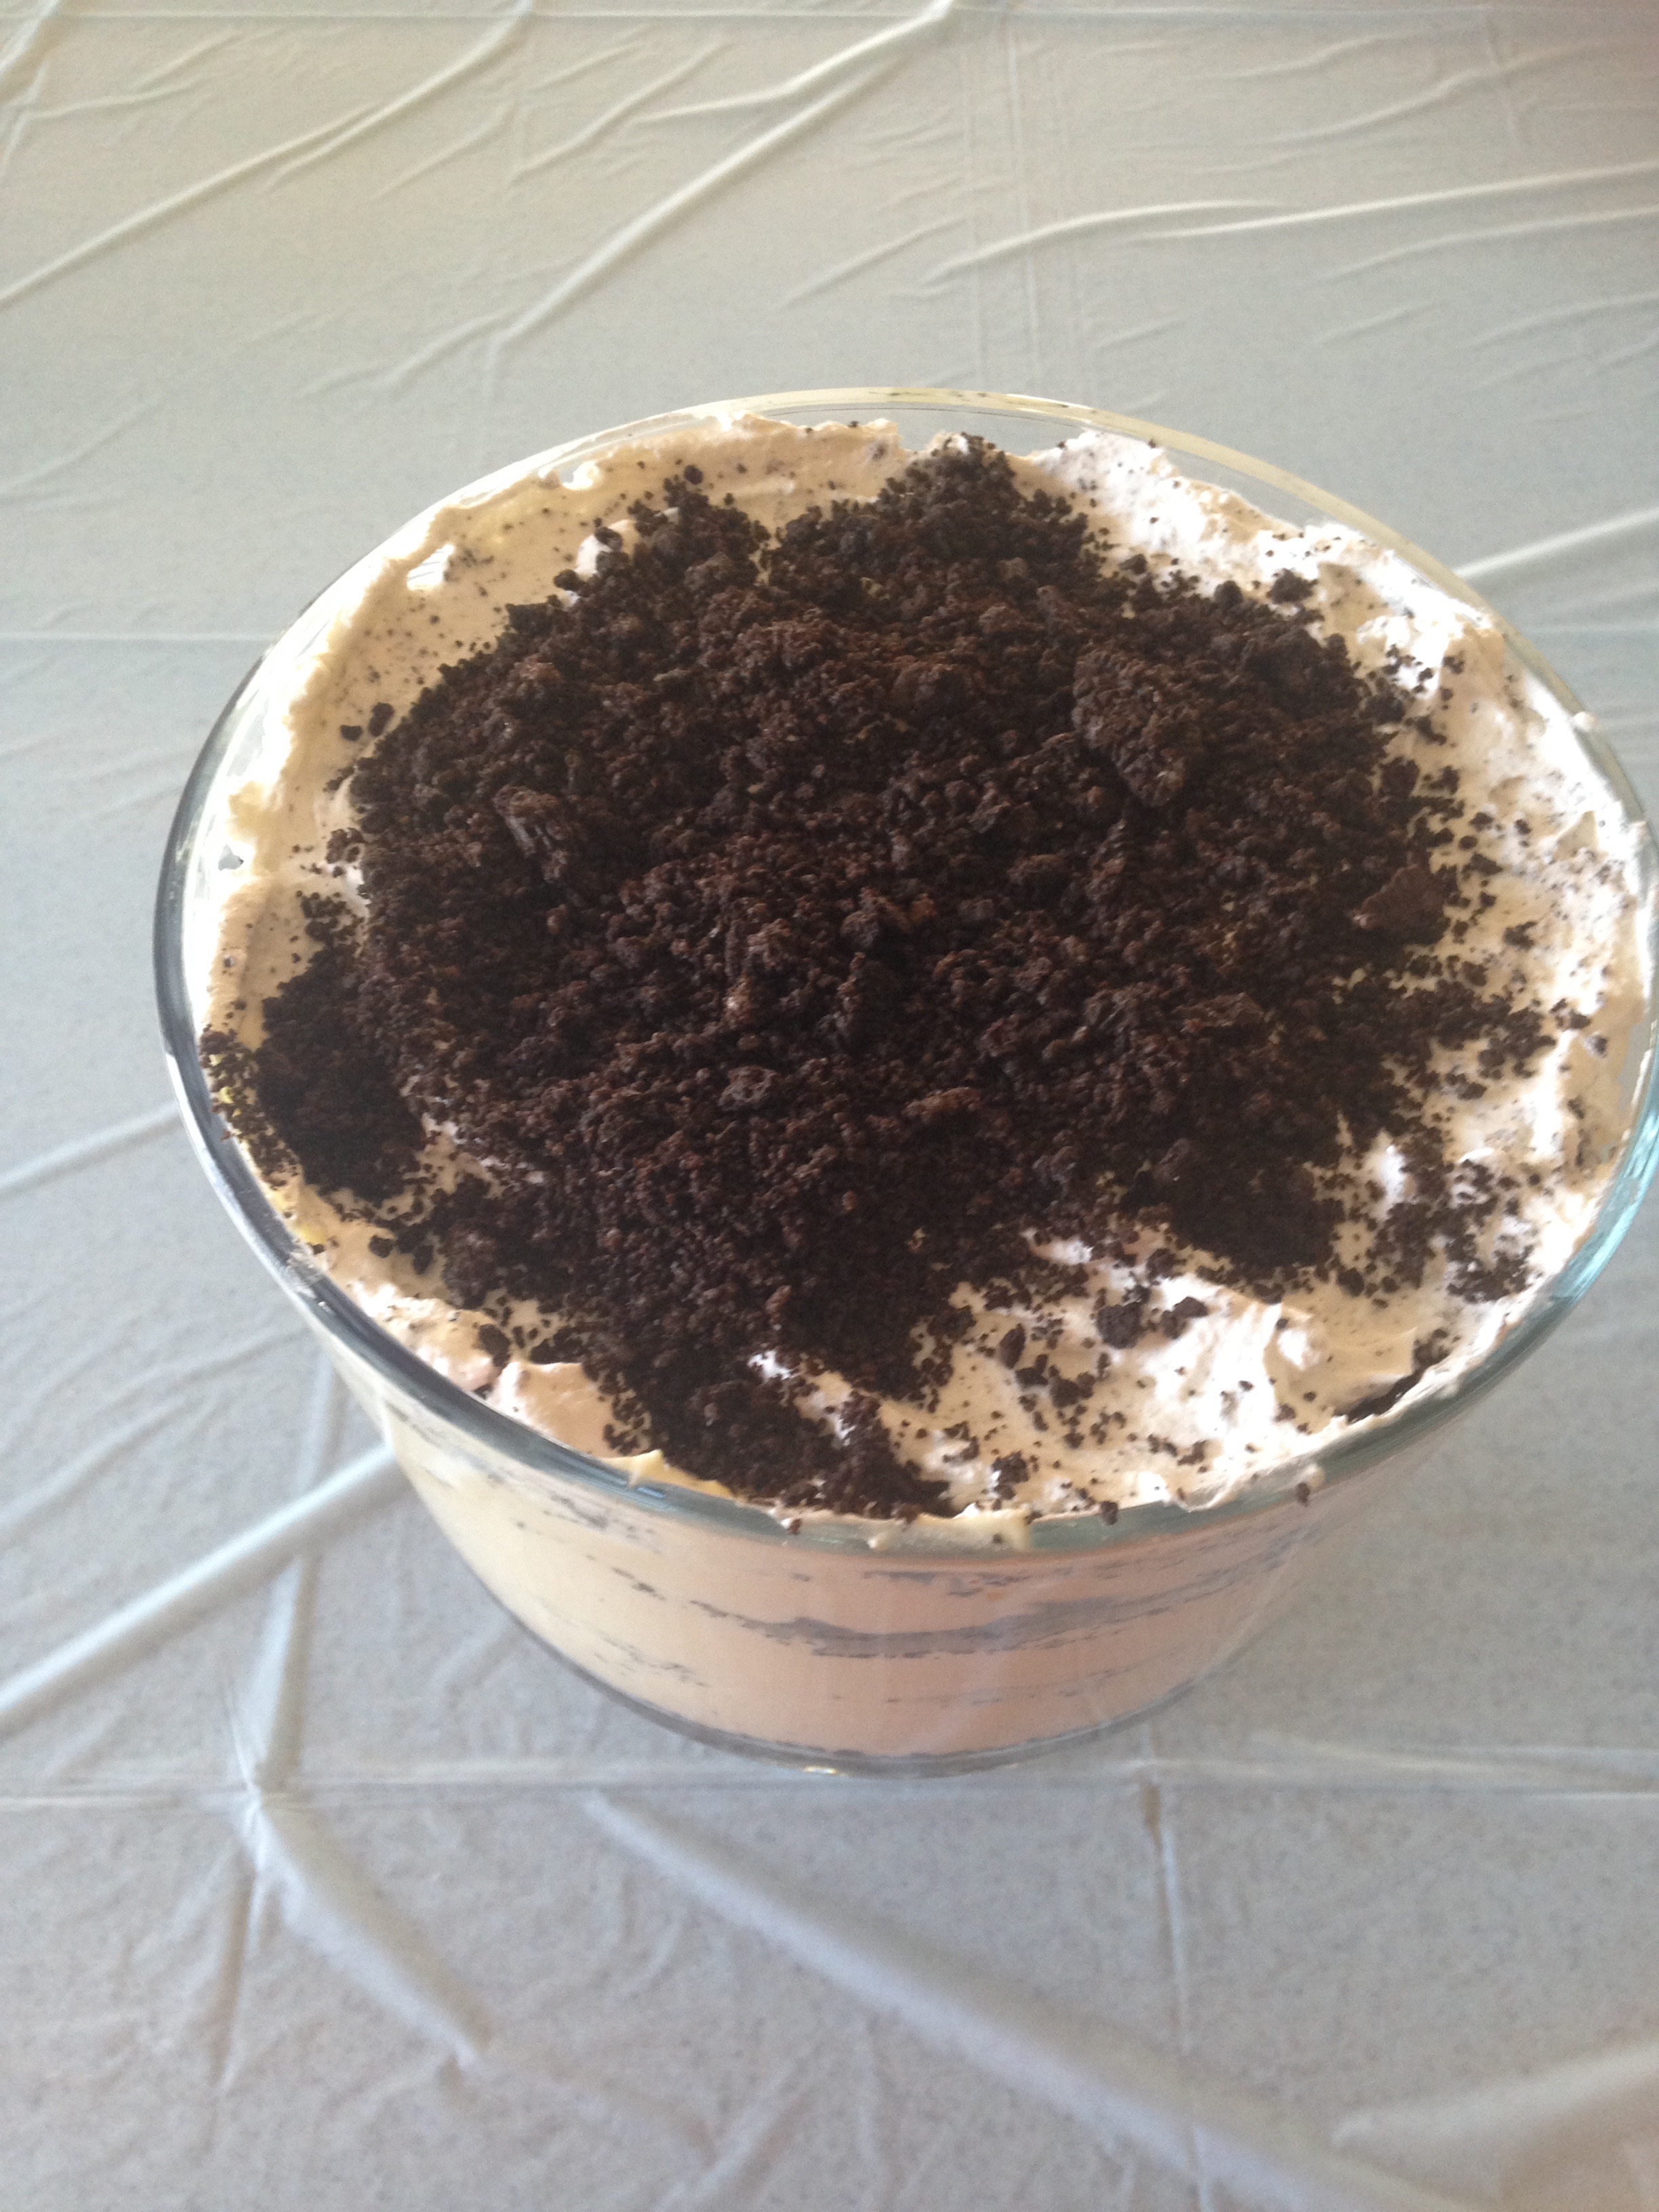 A easy no bake dessert made with cookies is ready to be served, topped with crushed Oreos